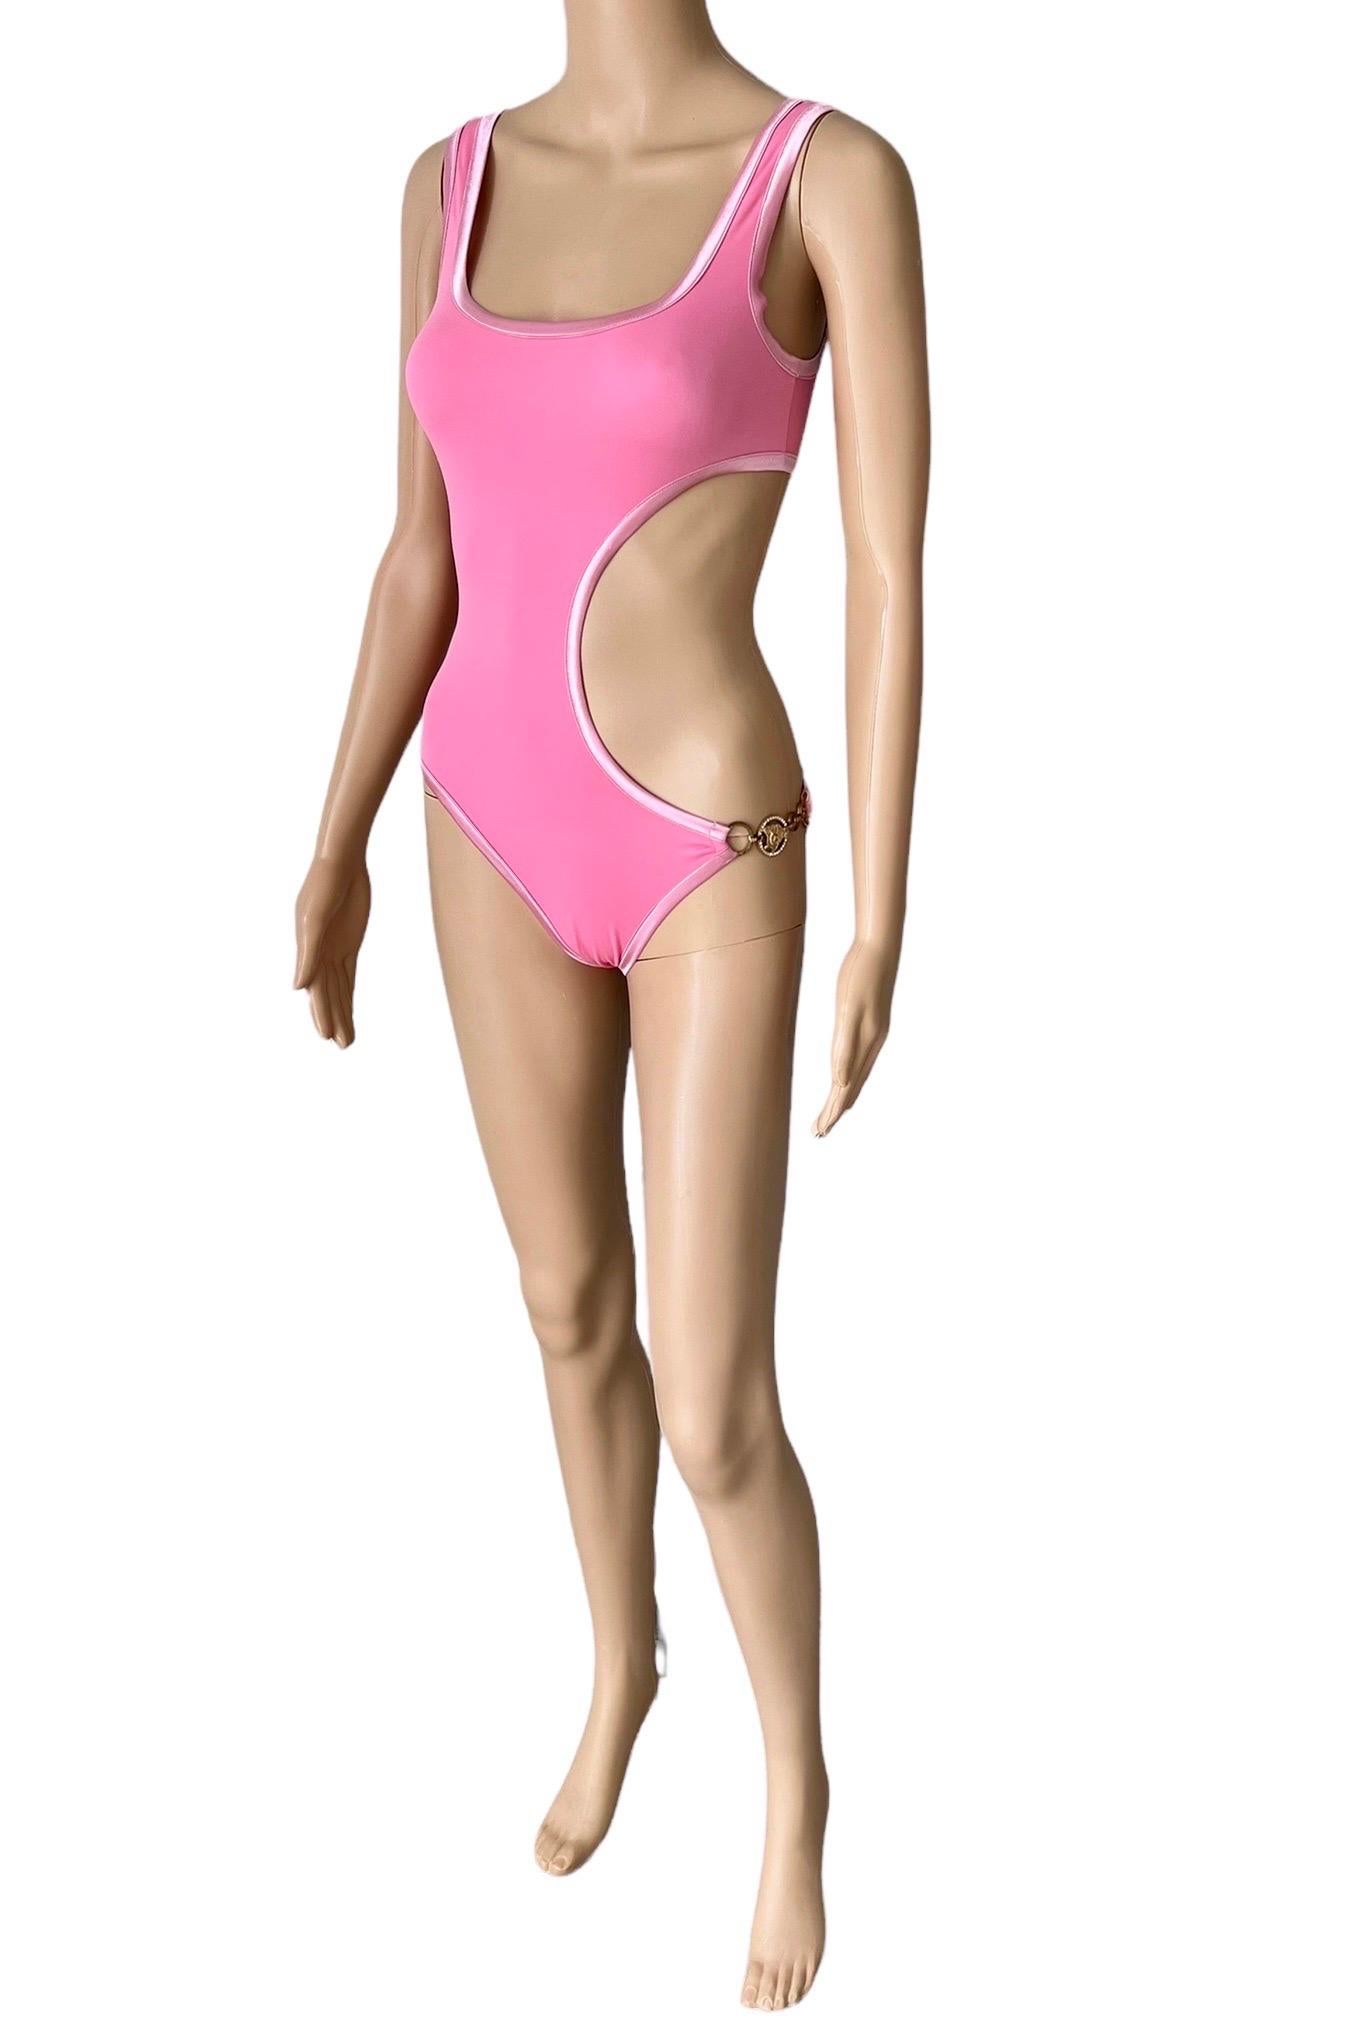 Pink Versace S/S 2005 Cutout Crystal Embellished Logo One-Piece Swimwear Swimsuit For Sale